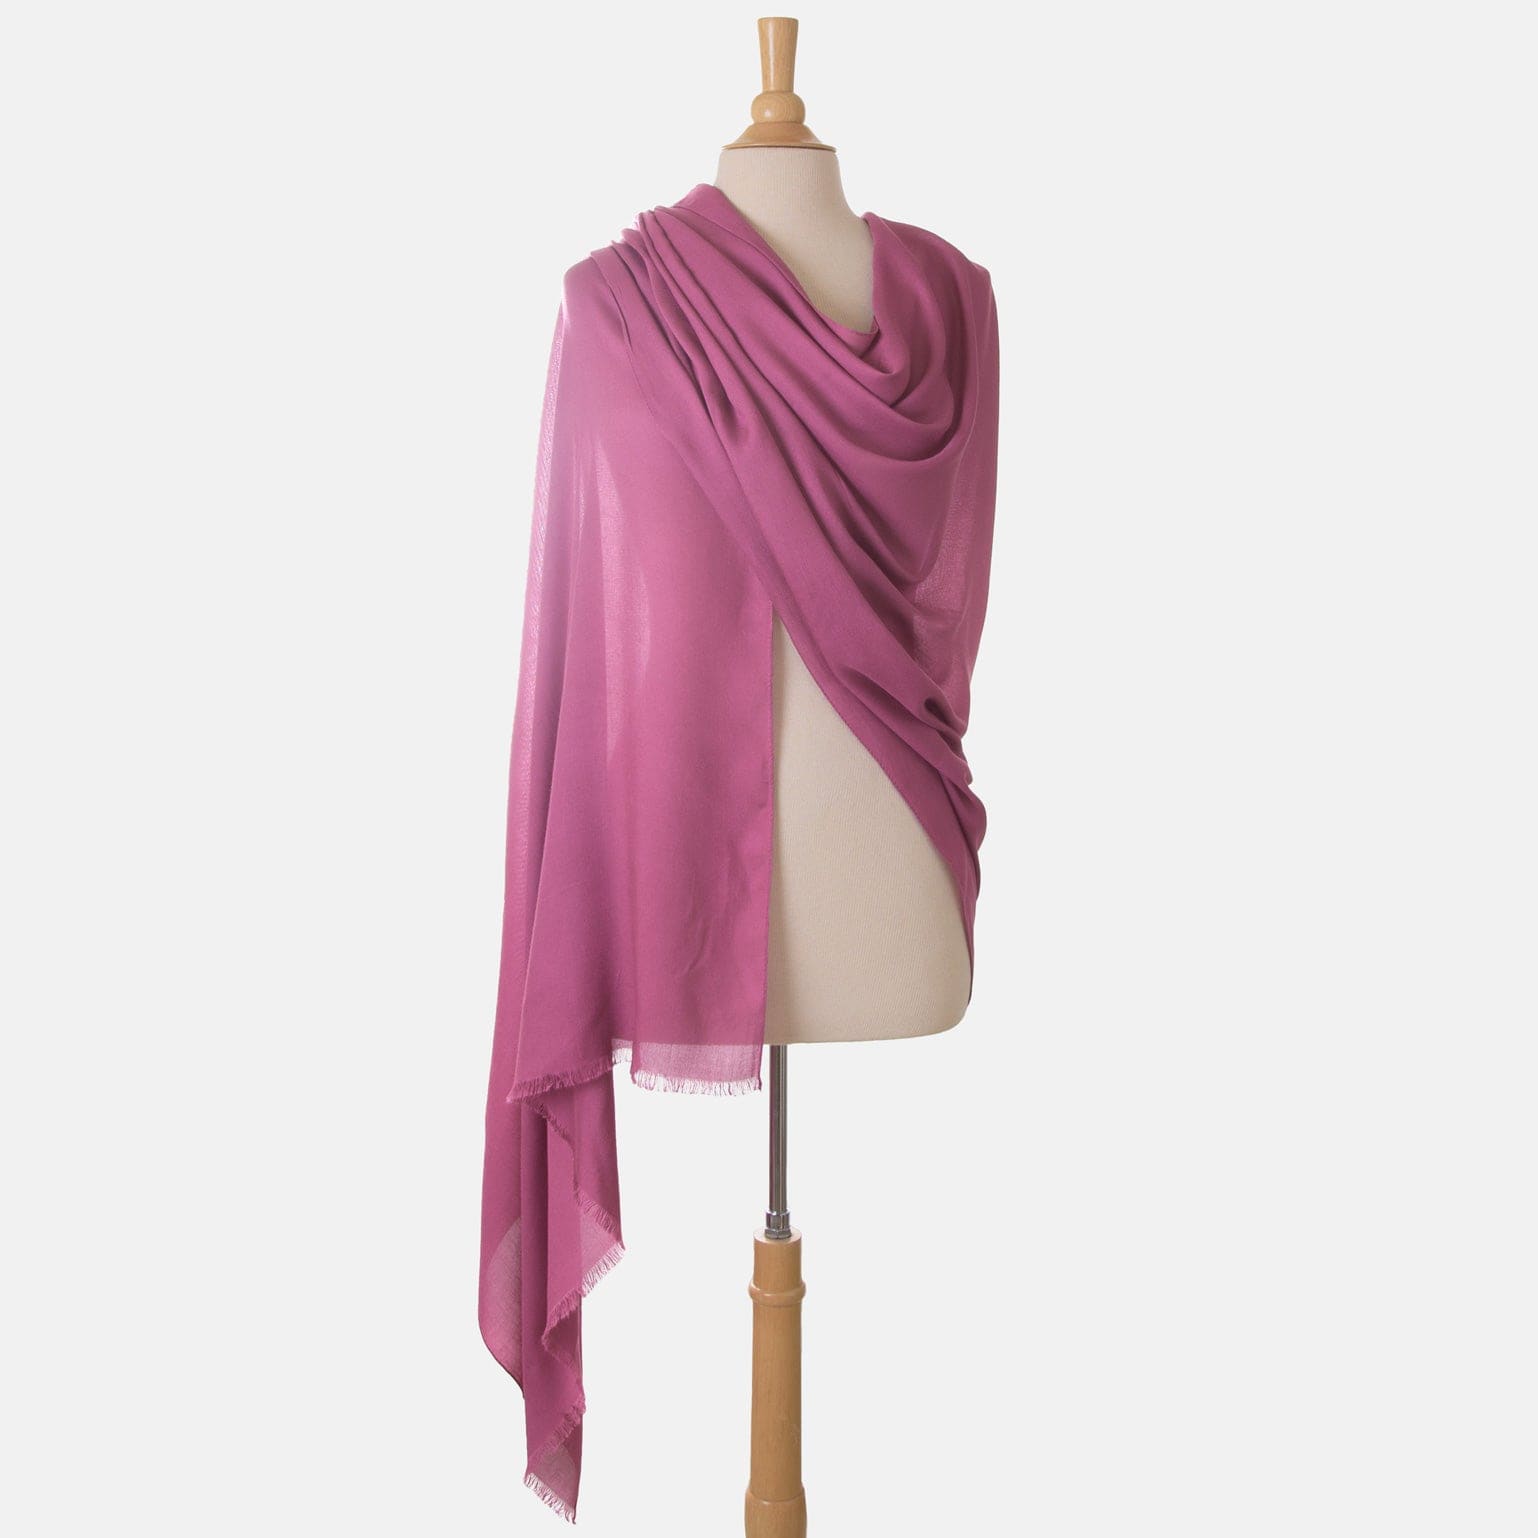 Women's Extra Large Modal Scarf - Raspberry Pink